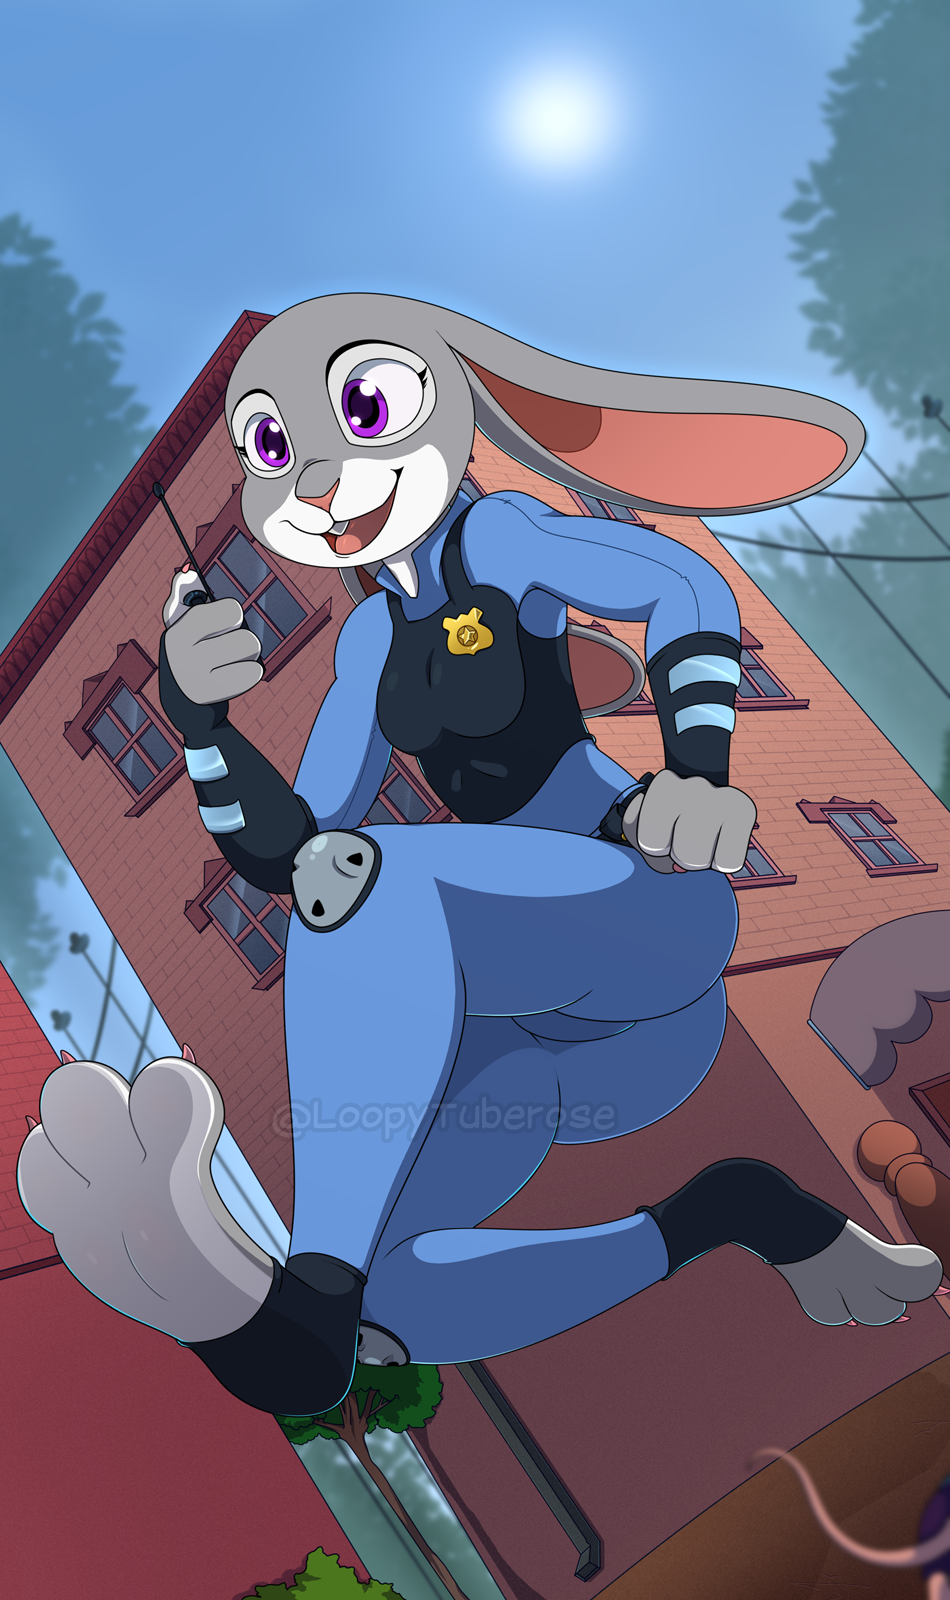 Most recent image: Officer Hopp's in Little Rodentia